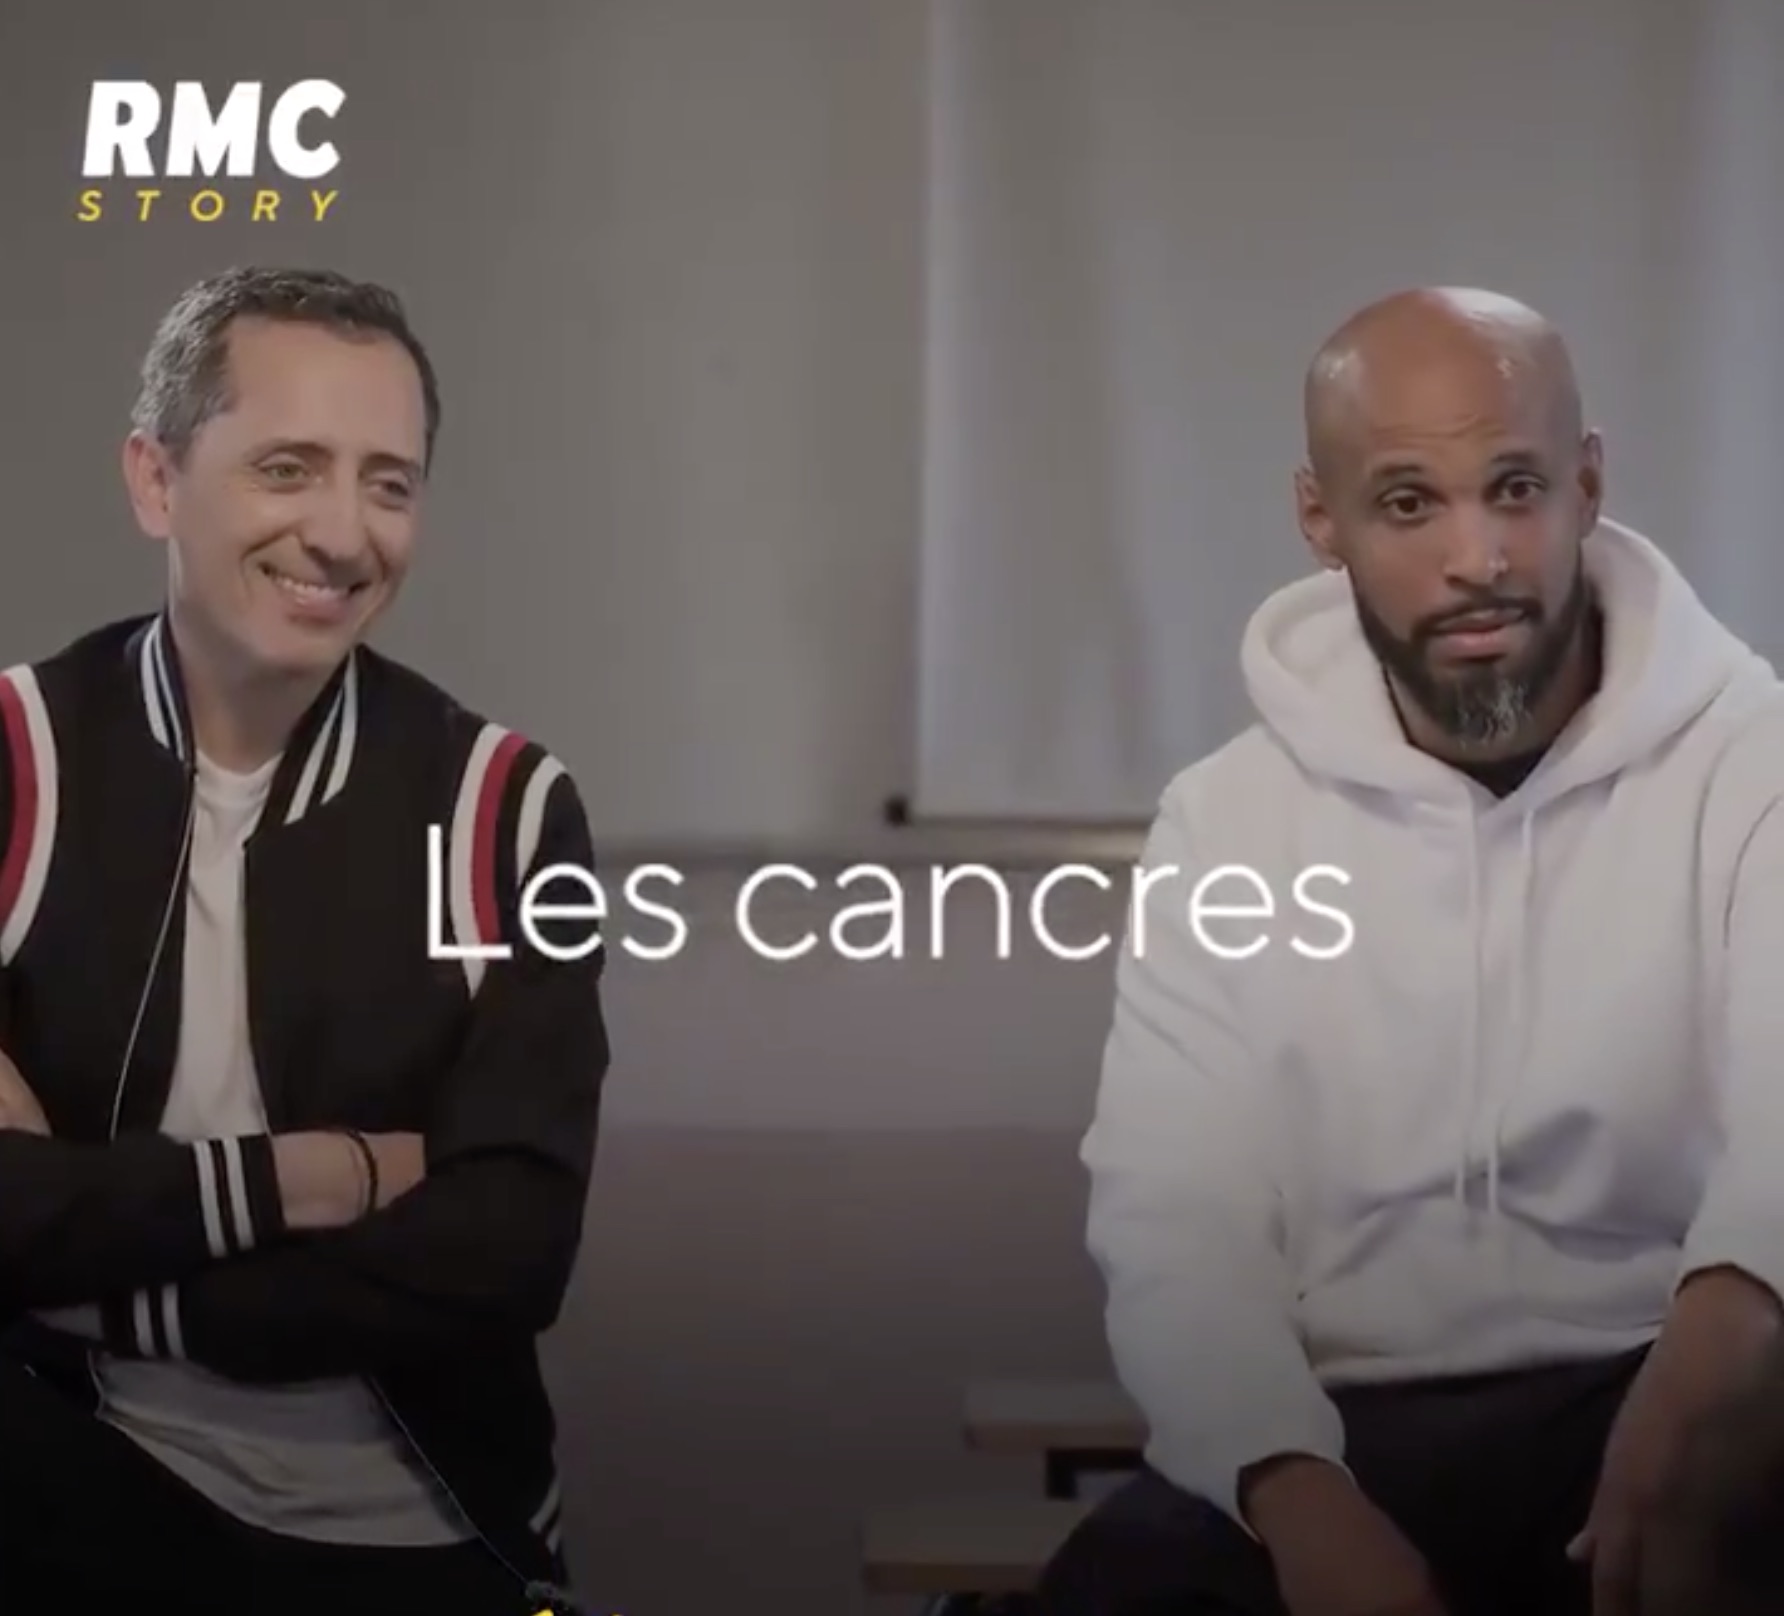 Les cancres - RMC Story 